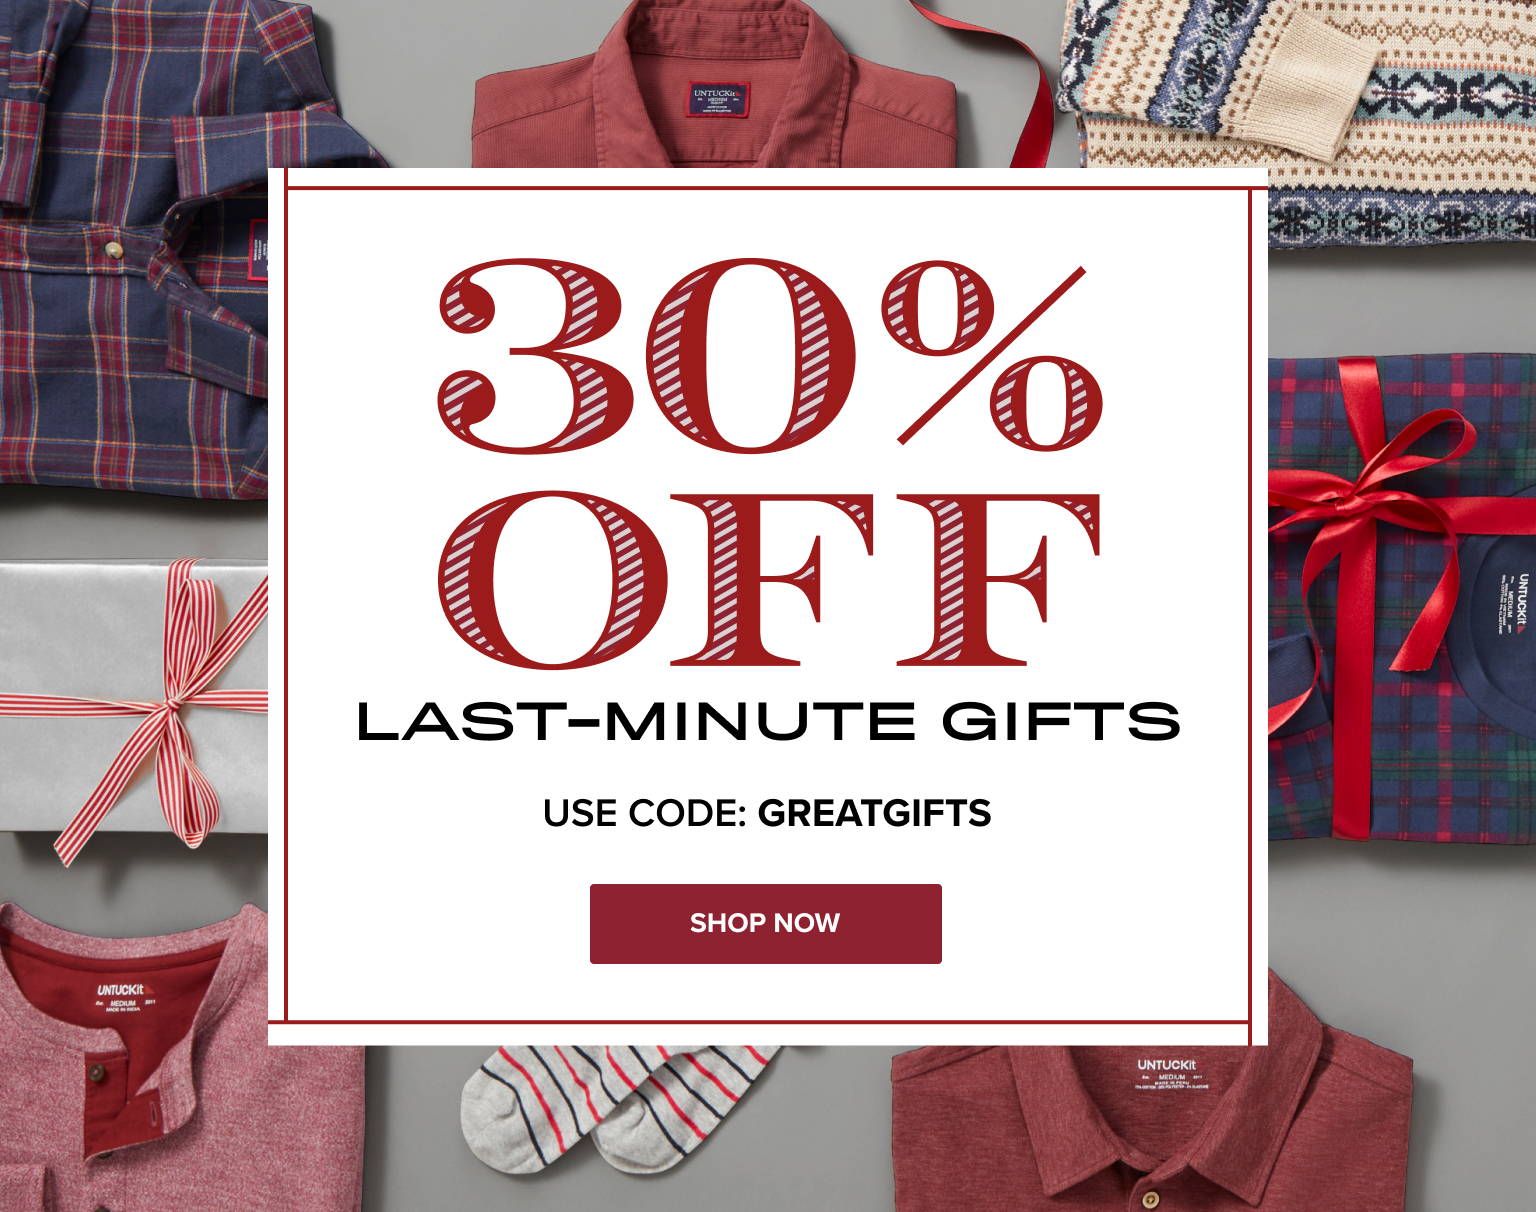 Laydown of Untuckit Holiday Products, 30% Off Last-Minute Gifts | Use Code: GREATGIFTS